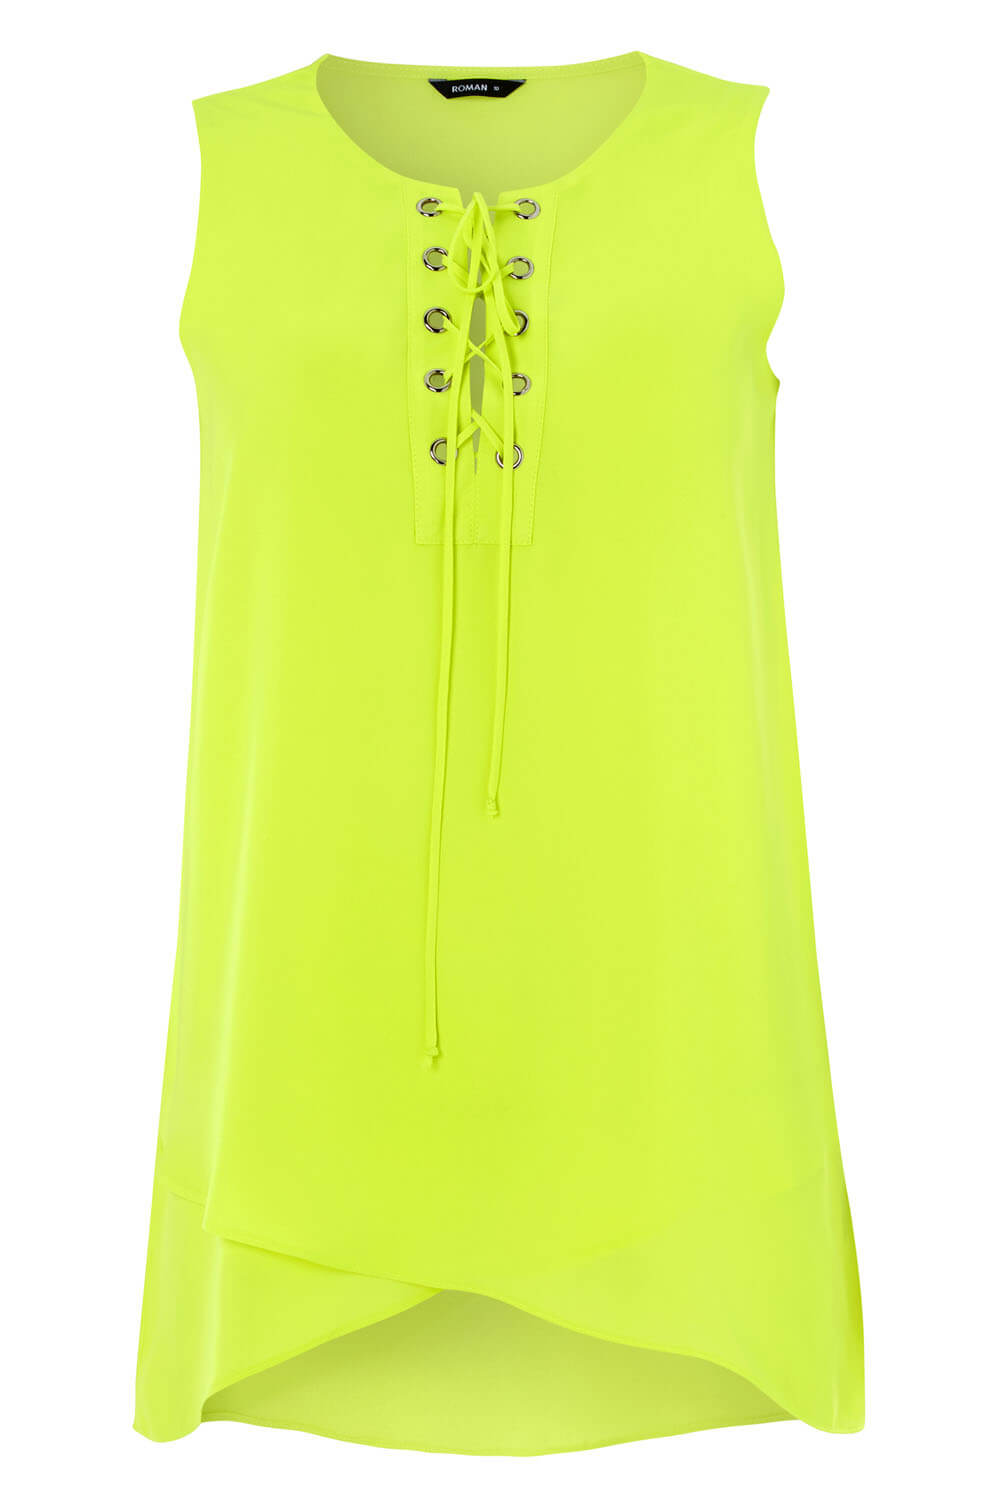 Lime Eyelet Lace Up Top in Lime - Roman Originals UK